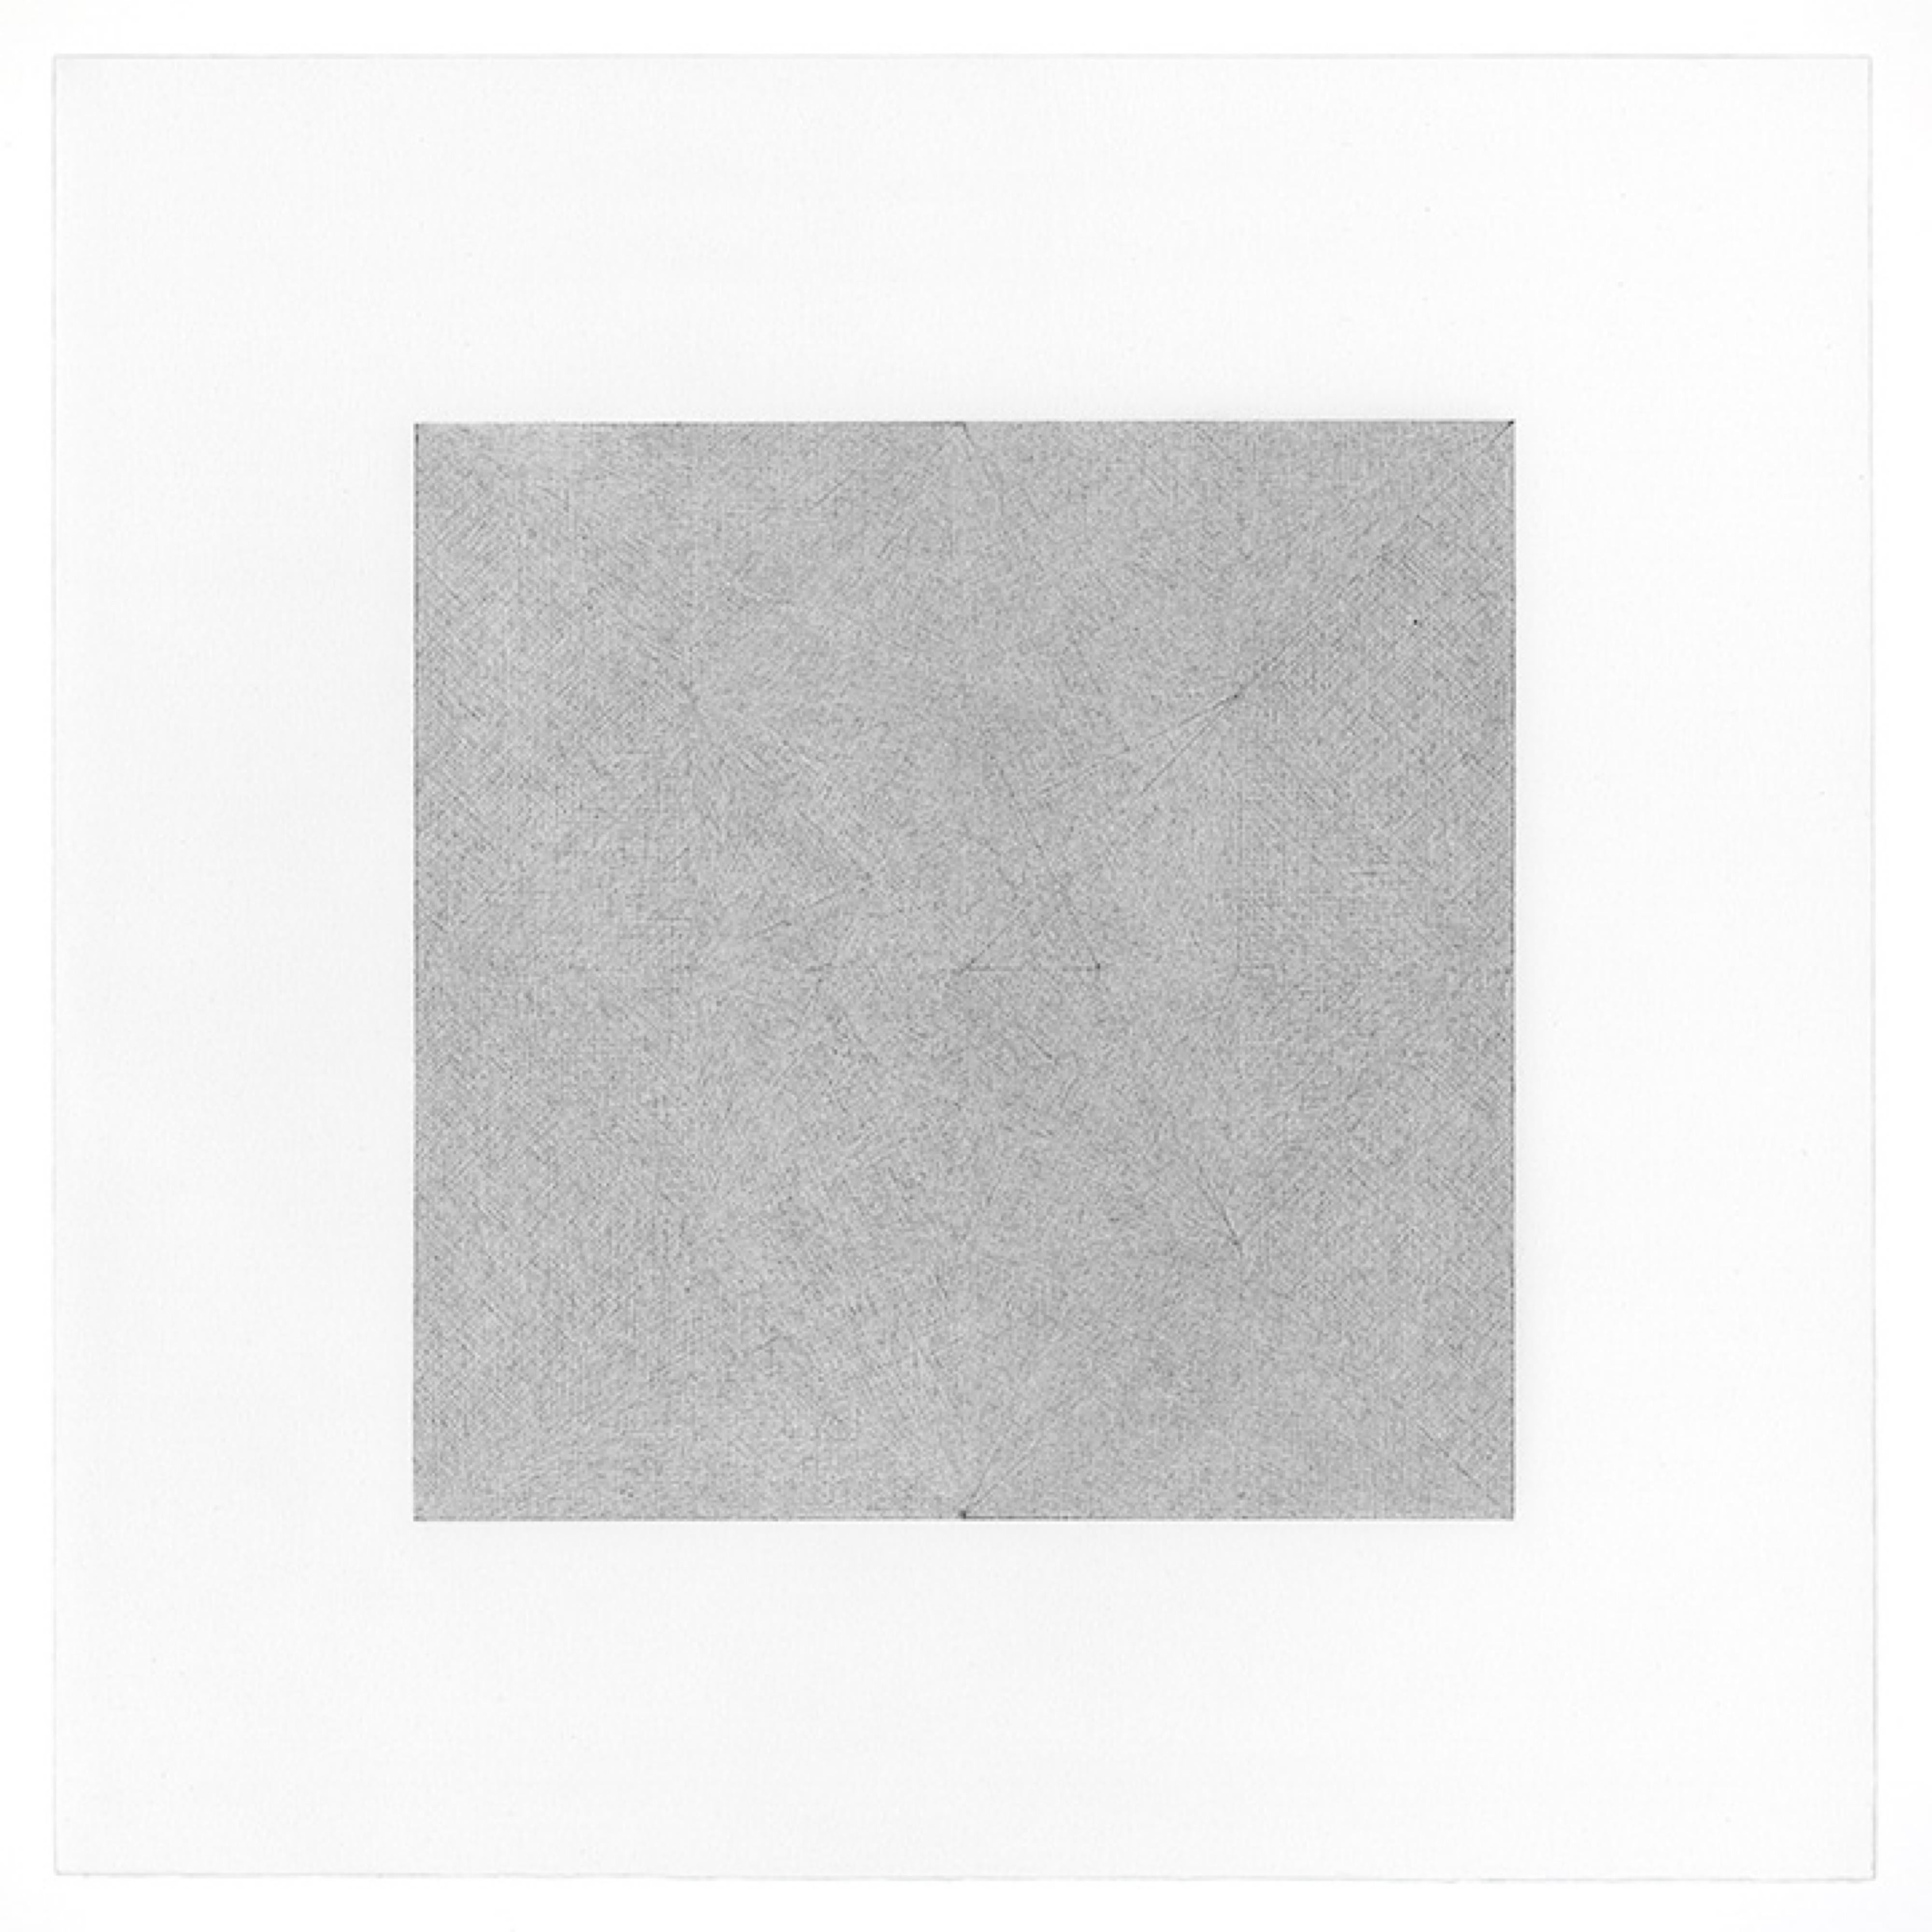 Patrick Carrara Garden of Silence Triptych, Graphite on Paper, 2009 In Excellent Condition For Sale In New York, NY